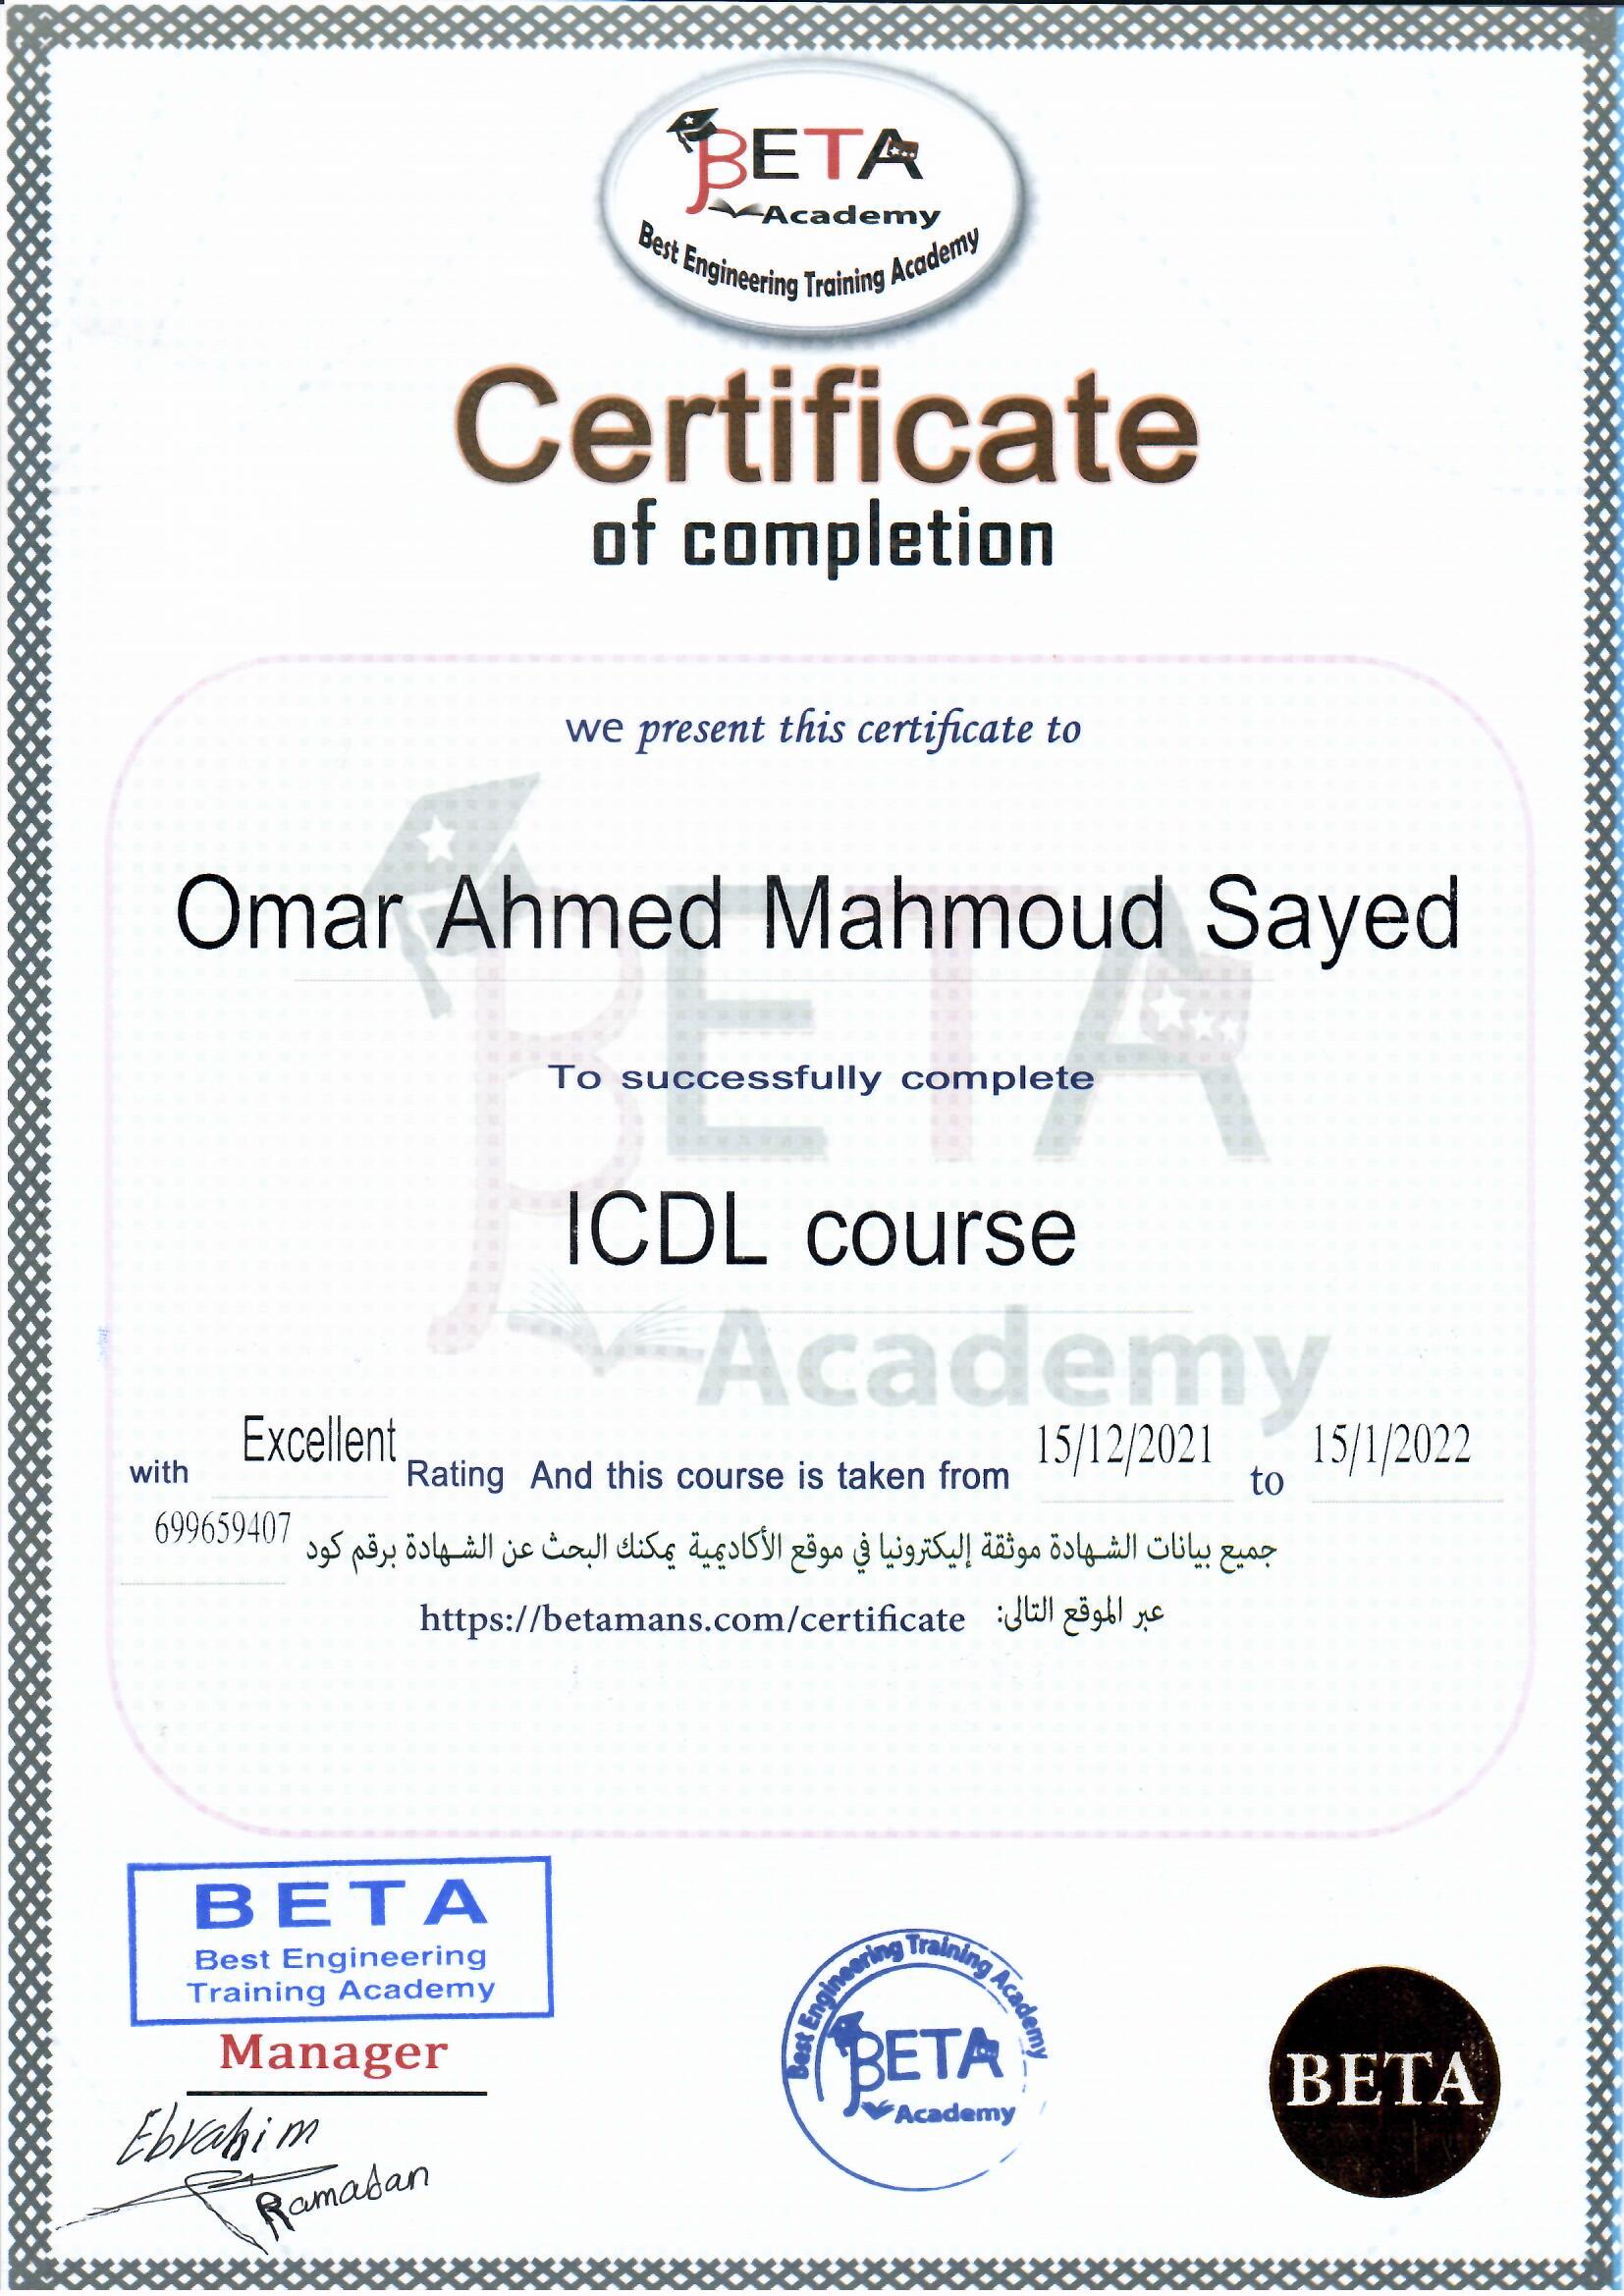 ICDL certificate